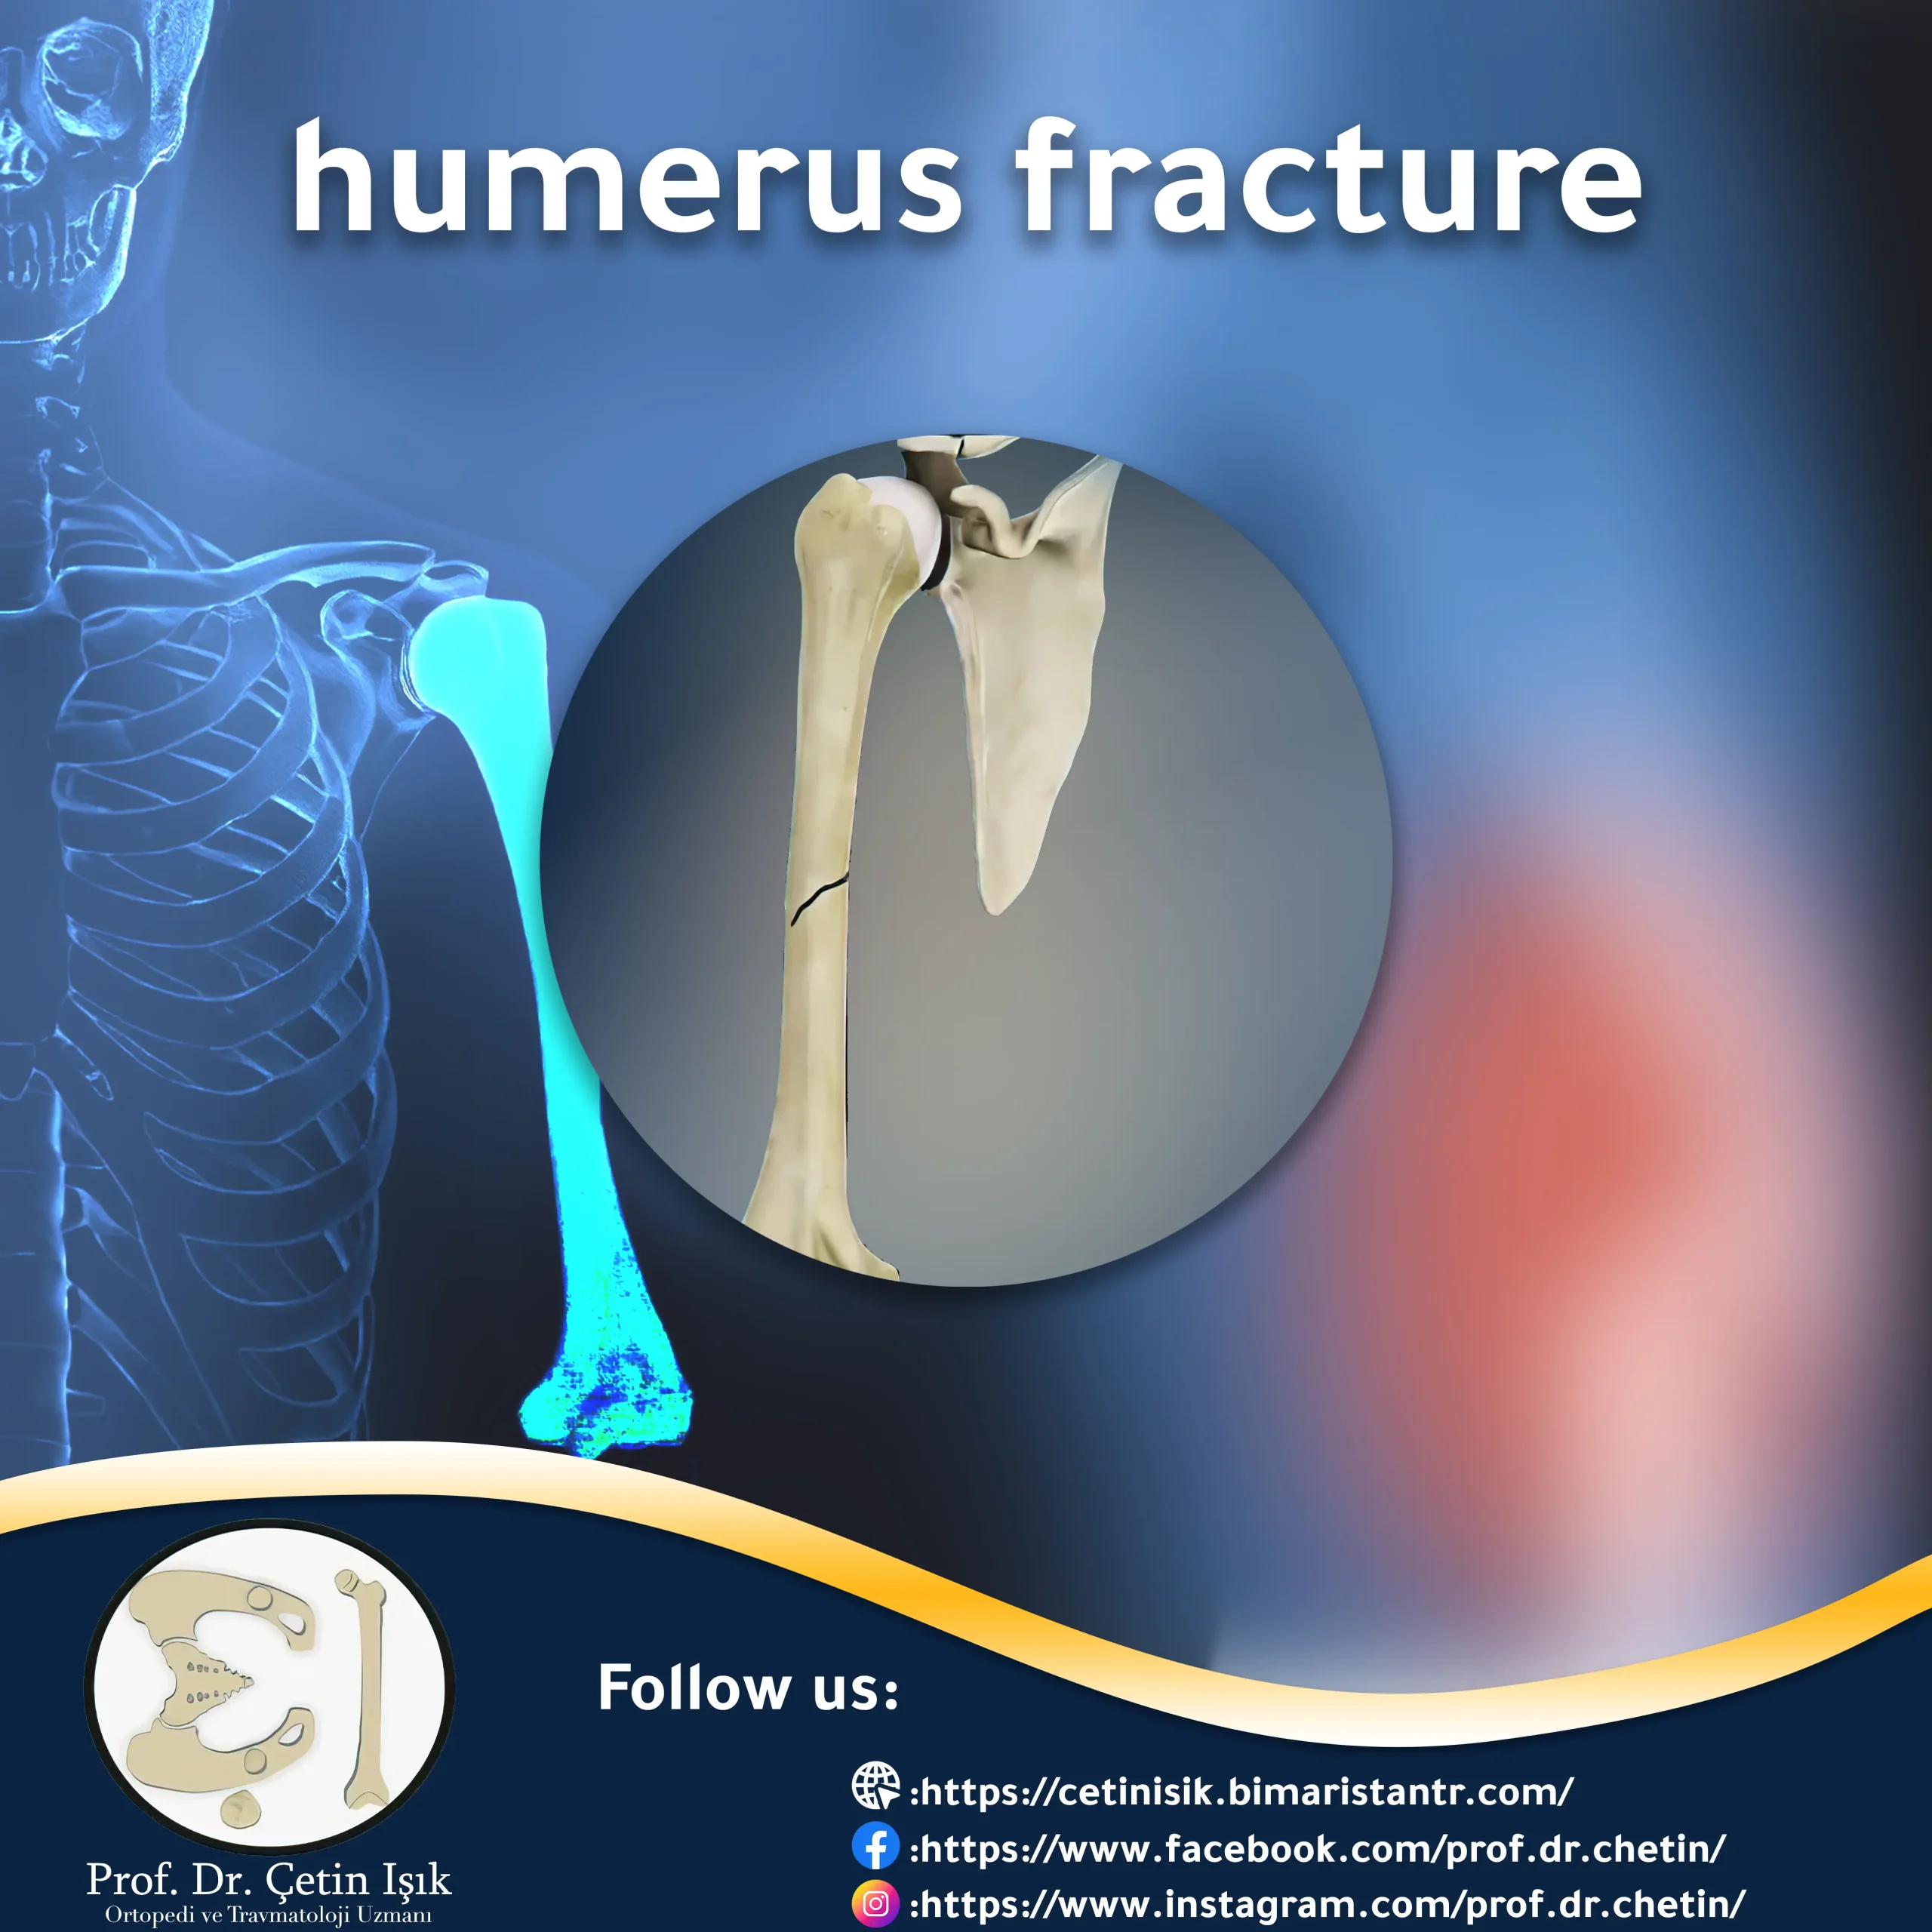 Humerus fracture; From diagnosis to treatment - Dr. What's wrong with you?